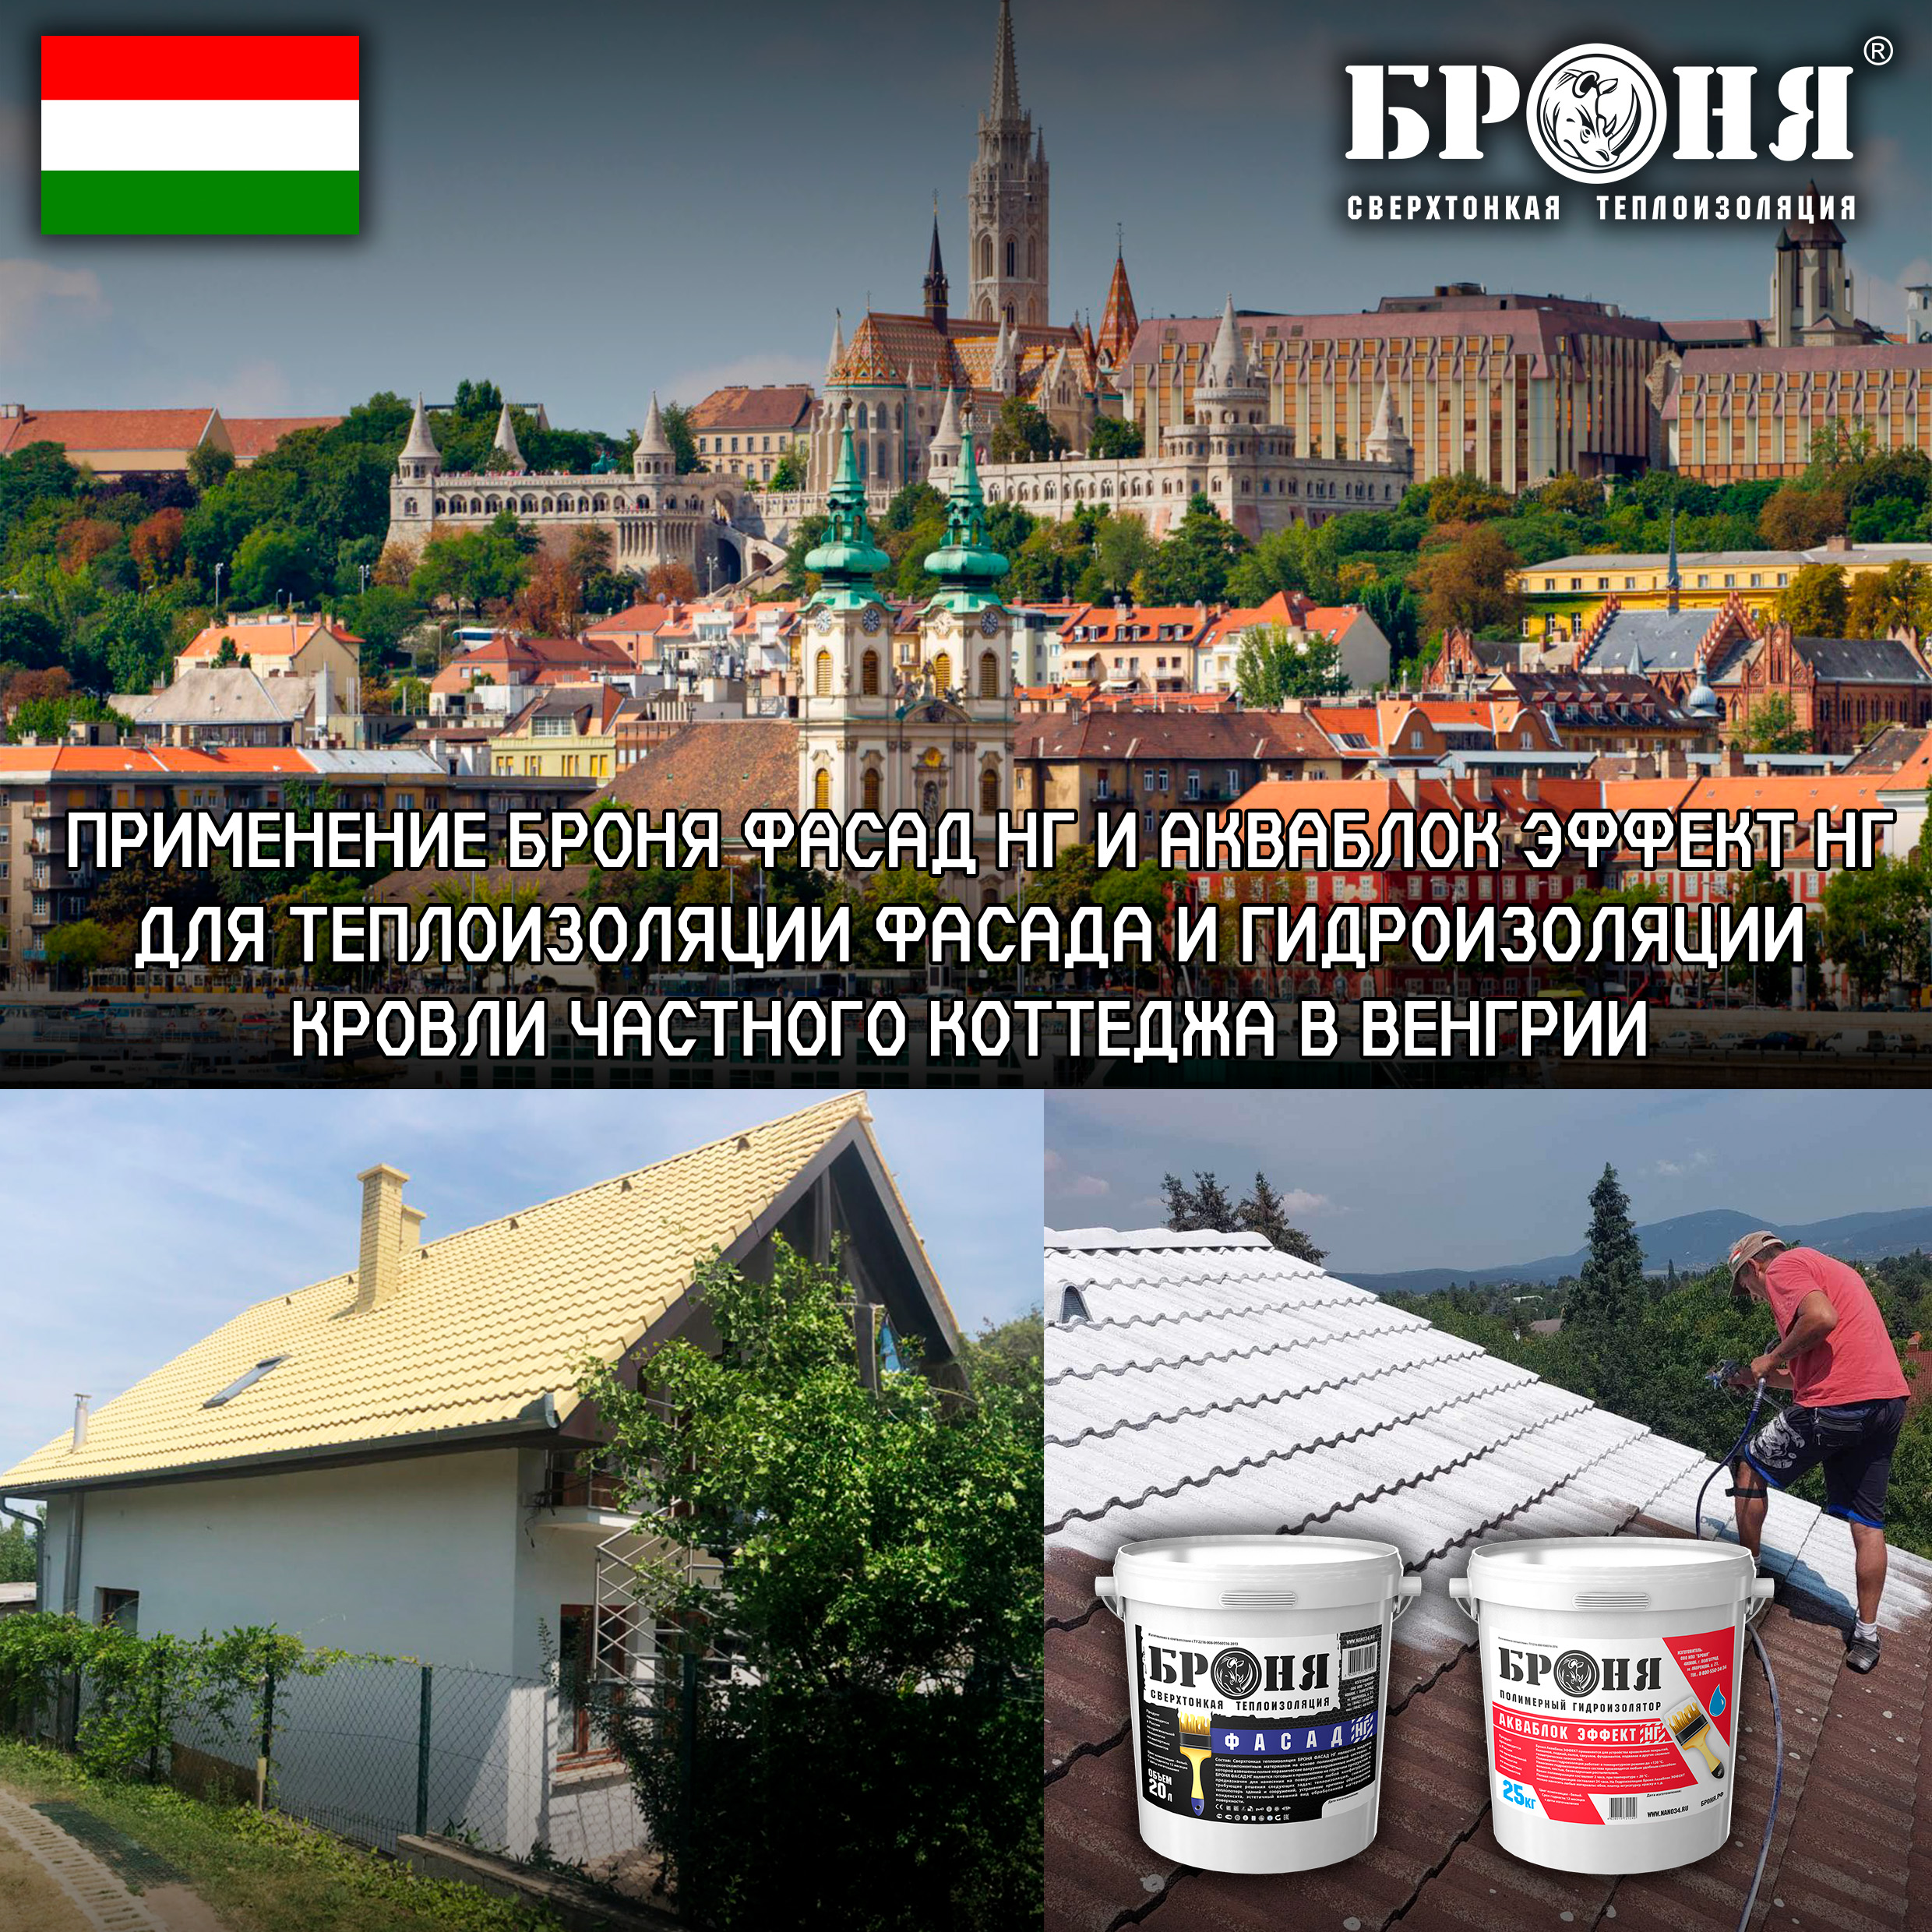 Application of Bronya Facade NF and Aquablock Effect NF for thermal insulation of the facade and waterproofing of the roof of a private cottage in Hungary (photo and video)